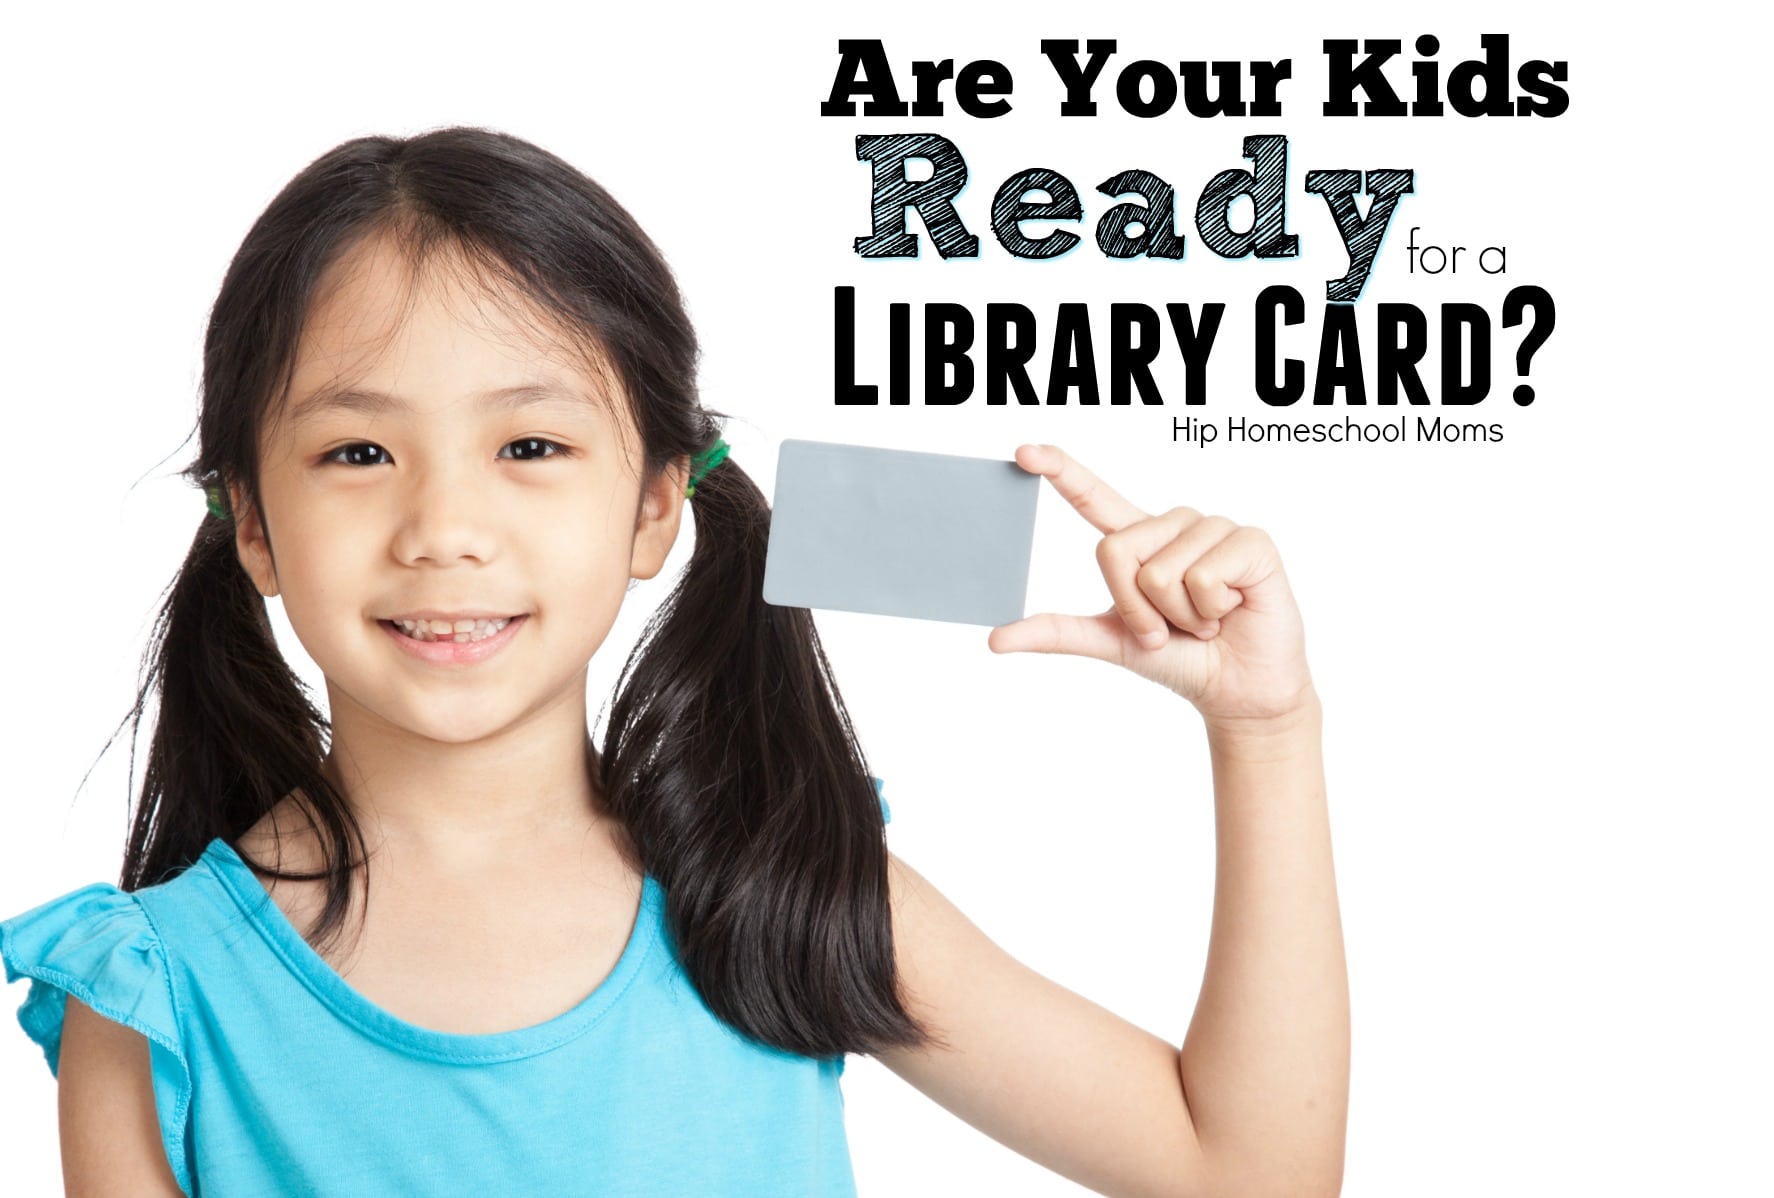 Are Your Kids Ready for a Library Card?